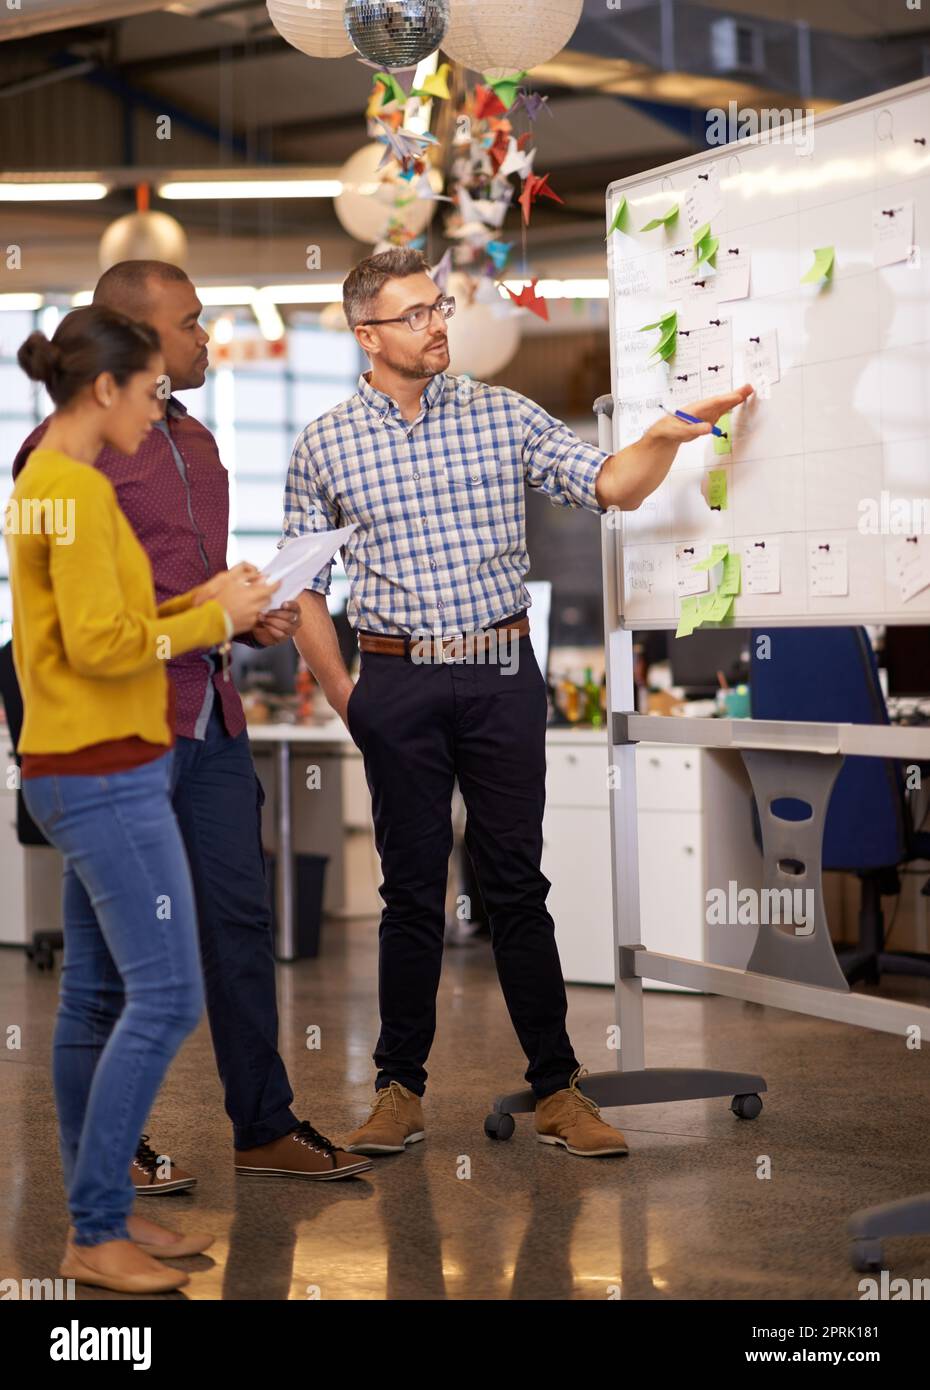 Together we can constantly come up with new ideas. a group of coworkers brainstorming at a whiteboard. Stock Photo